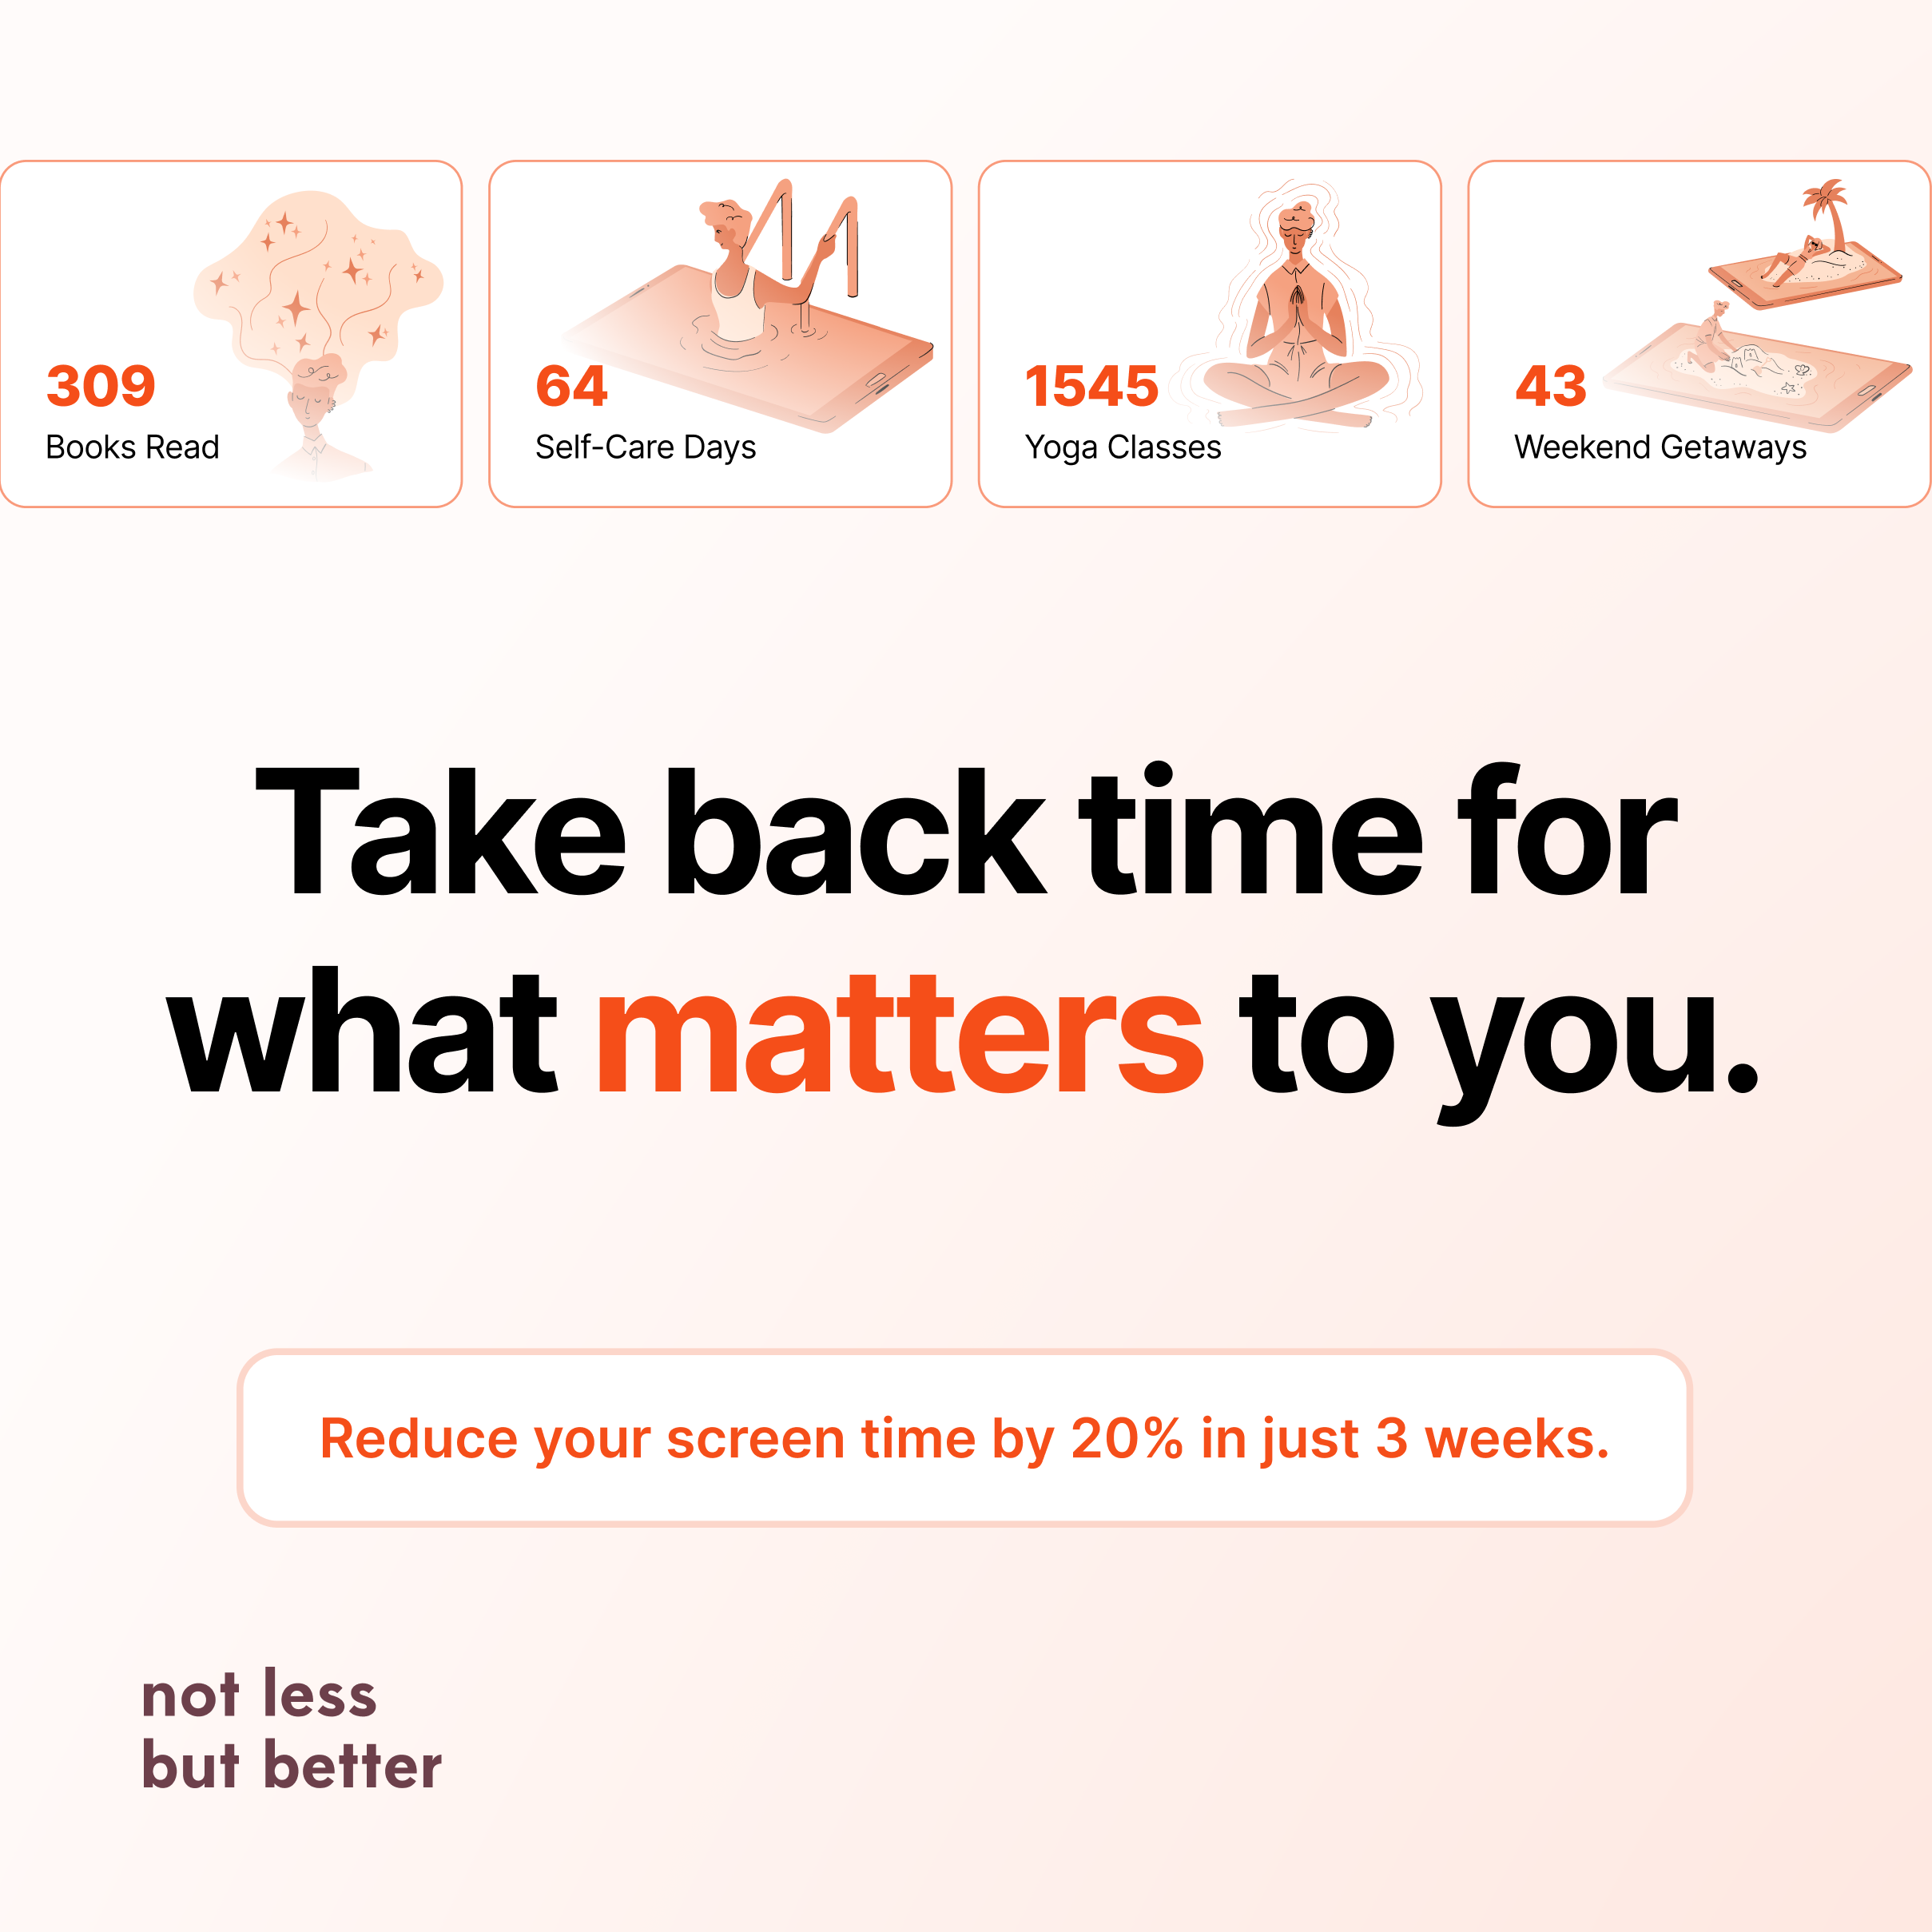 Social media graphic: "Take back time for what matters to you"